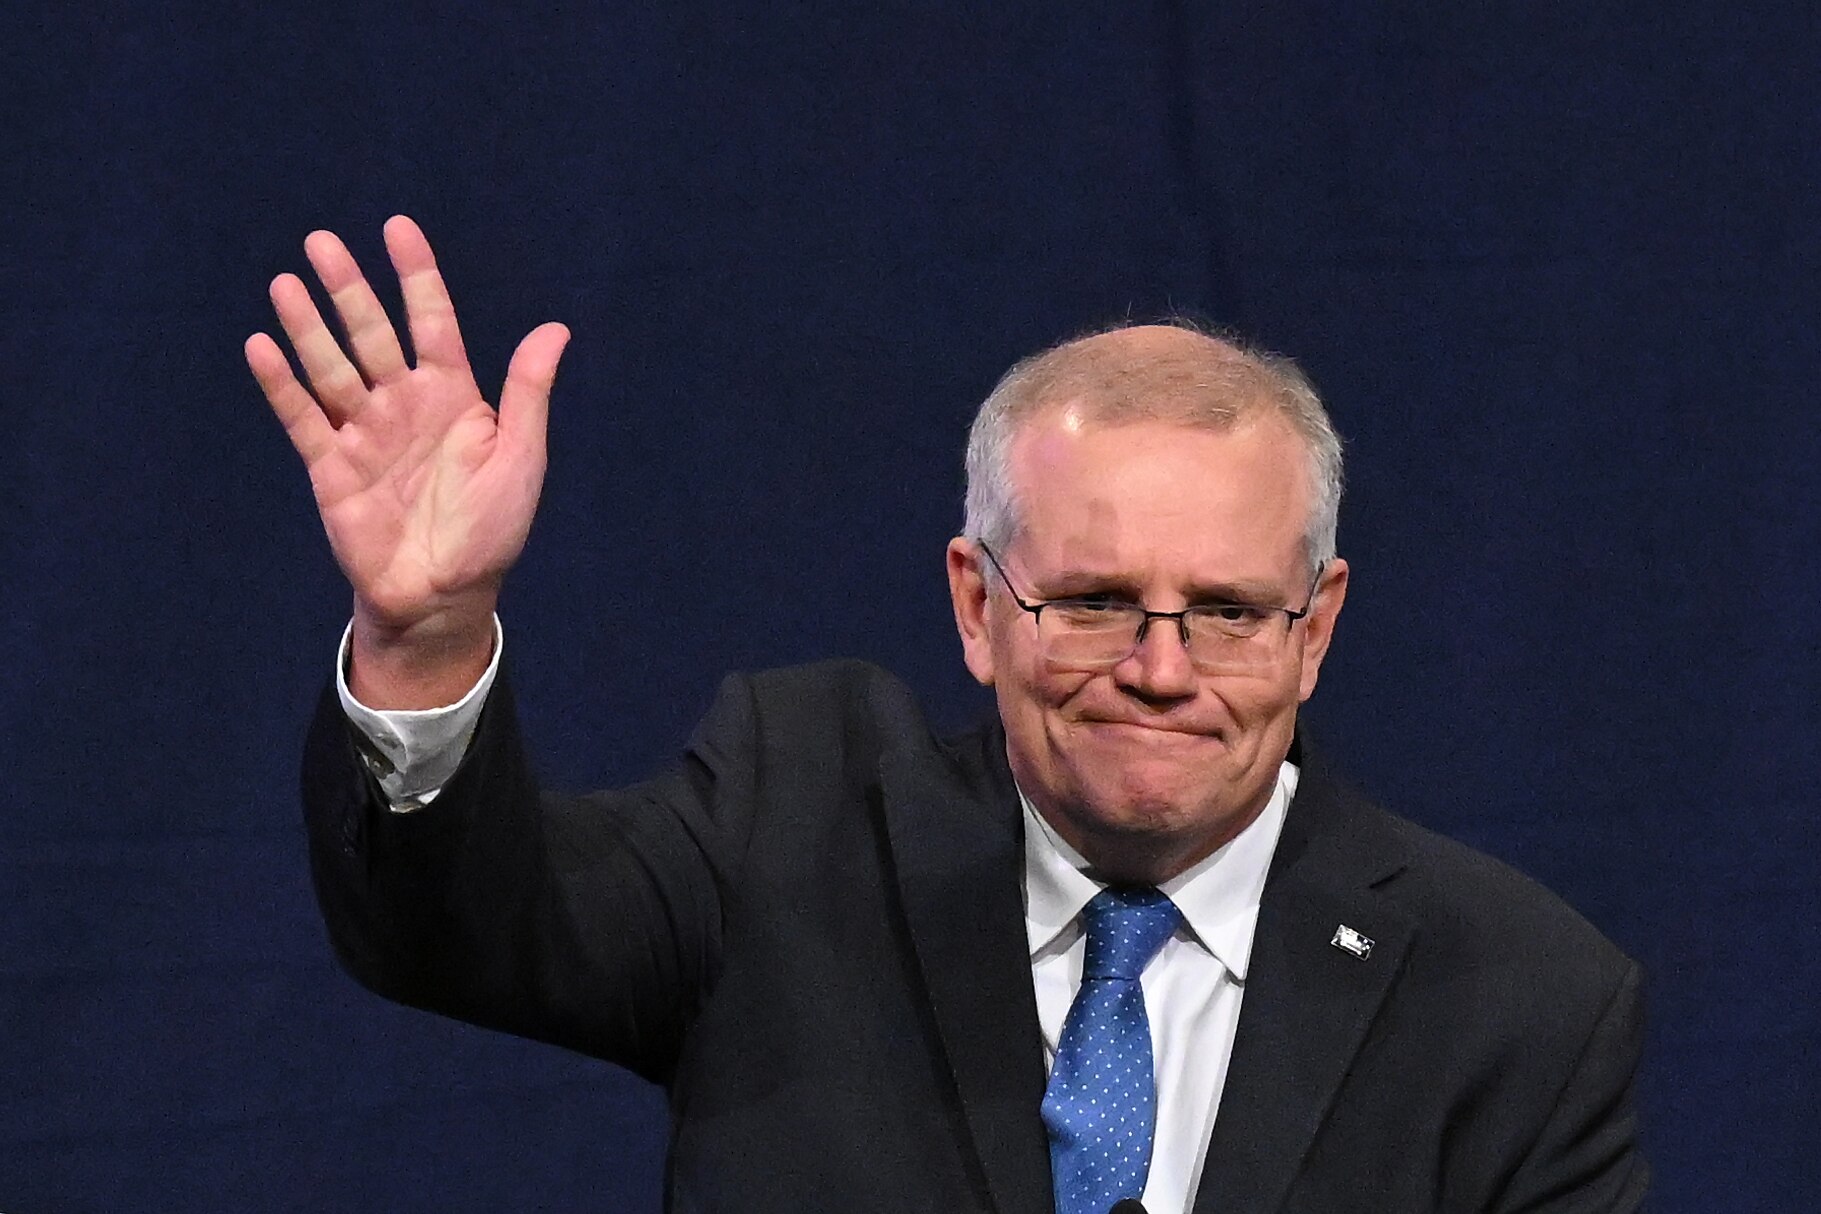 Outgoing Prime Minister Scott Morrison concedes defeat in the 2022 Federal Election, at the Federal Liberal Reception at The Fullerton Hotel, Sydney